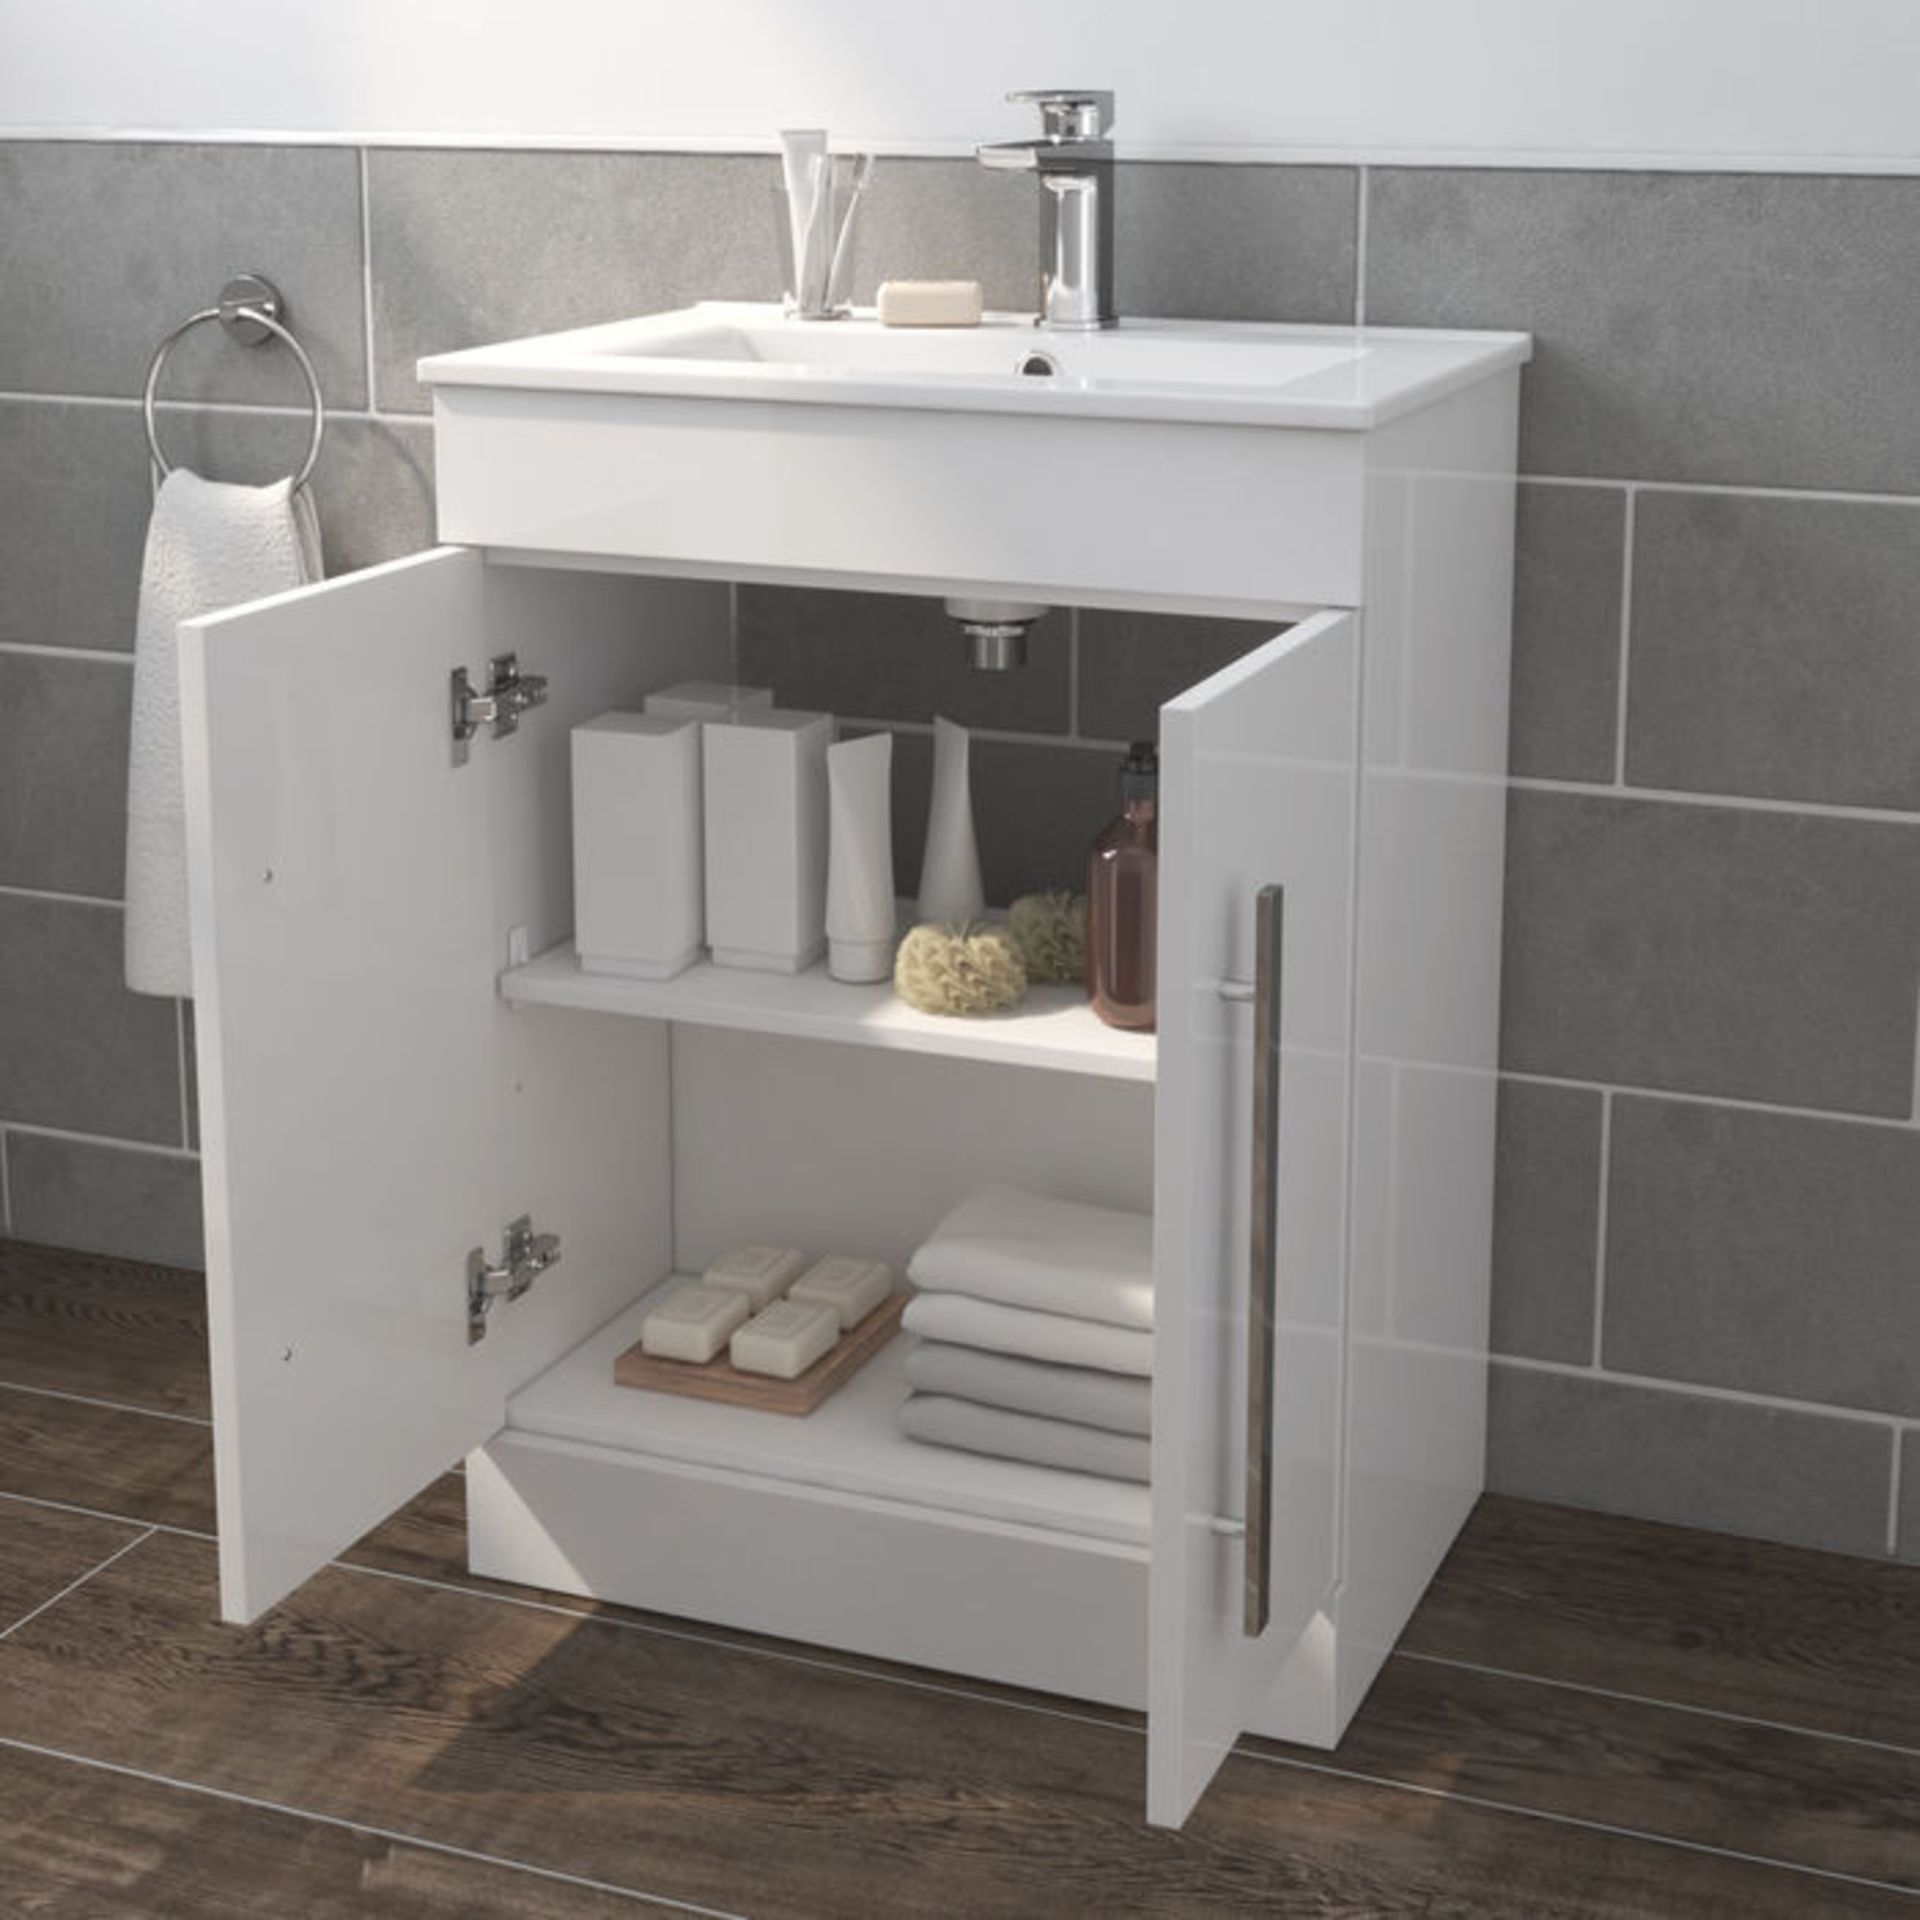 (JM29) 600mm Avon High Gloss White Basin Cabinet - Floor Standing. RRP £499.99. Comes complete - Image 2 of 5